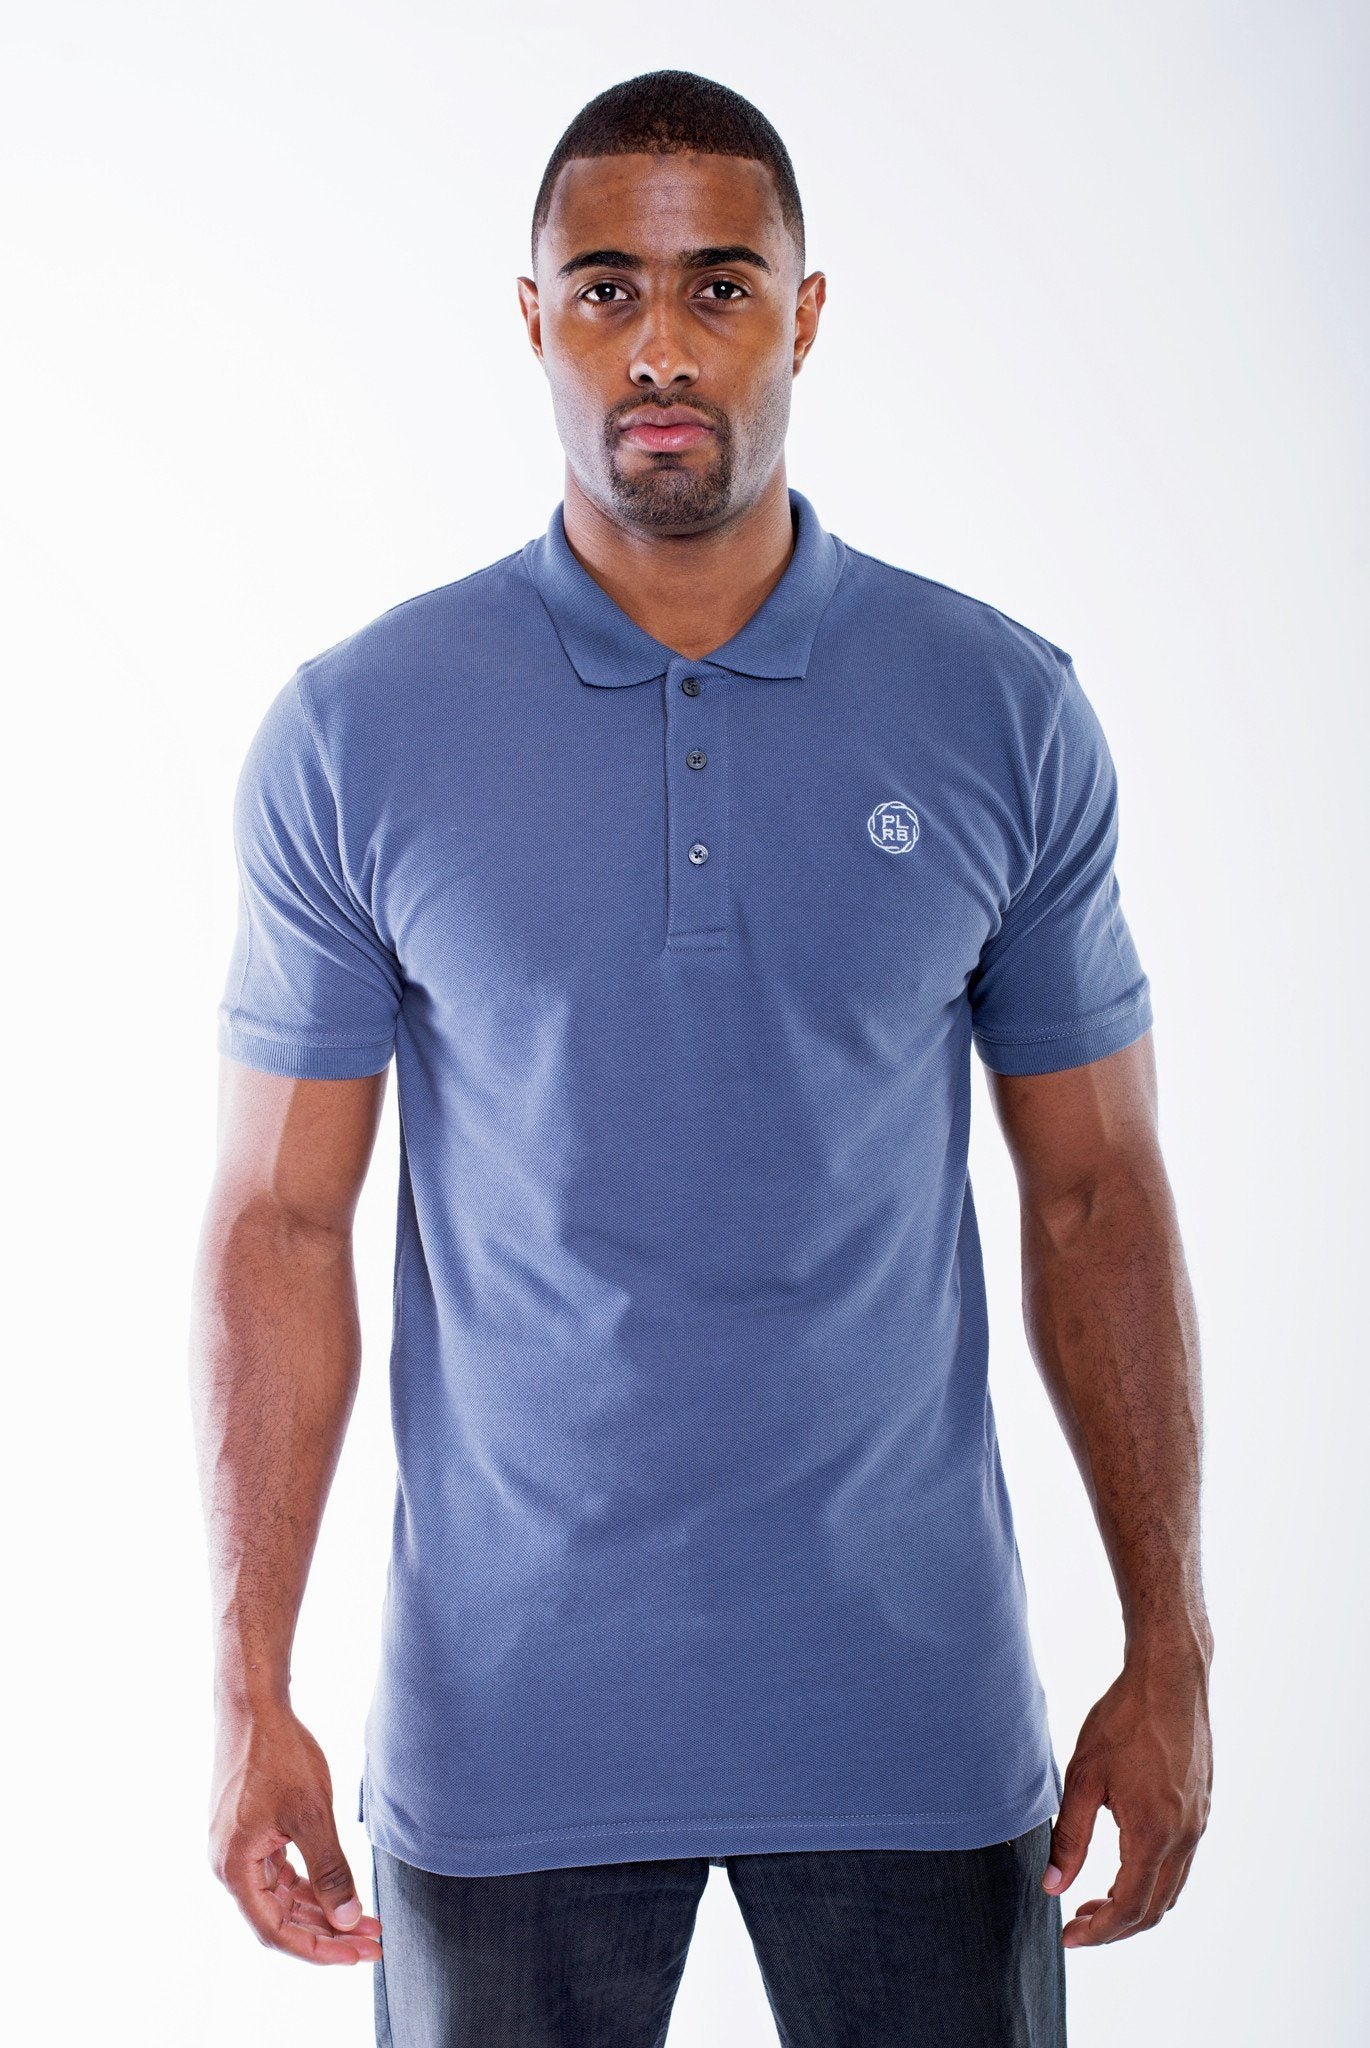 GREY CLASSIC PIQUE POLO - TALL | Poor Little Rich Boy Clothing